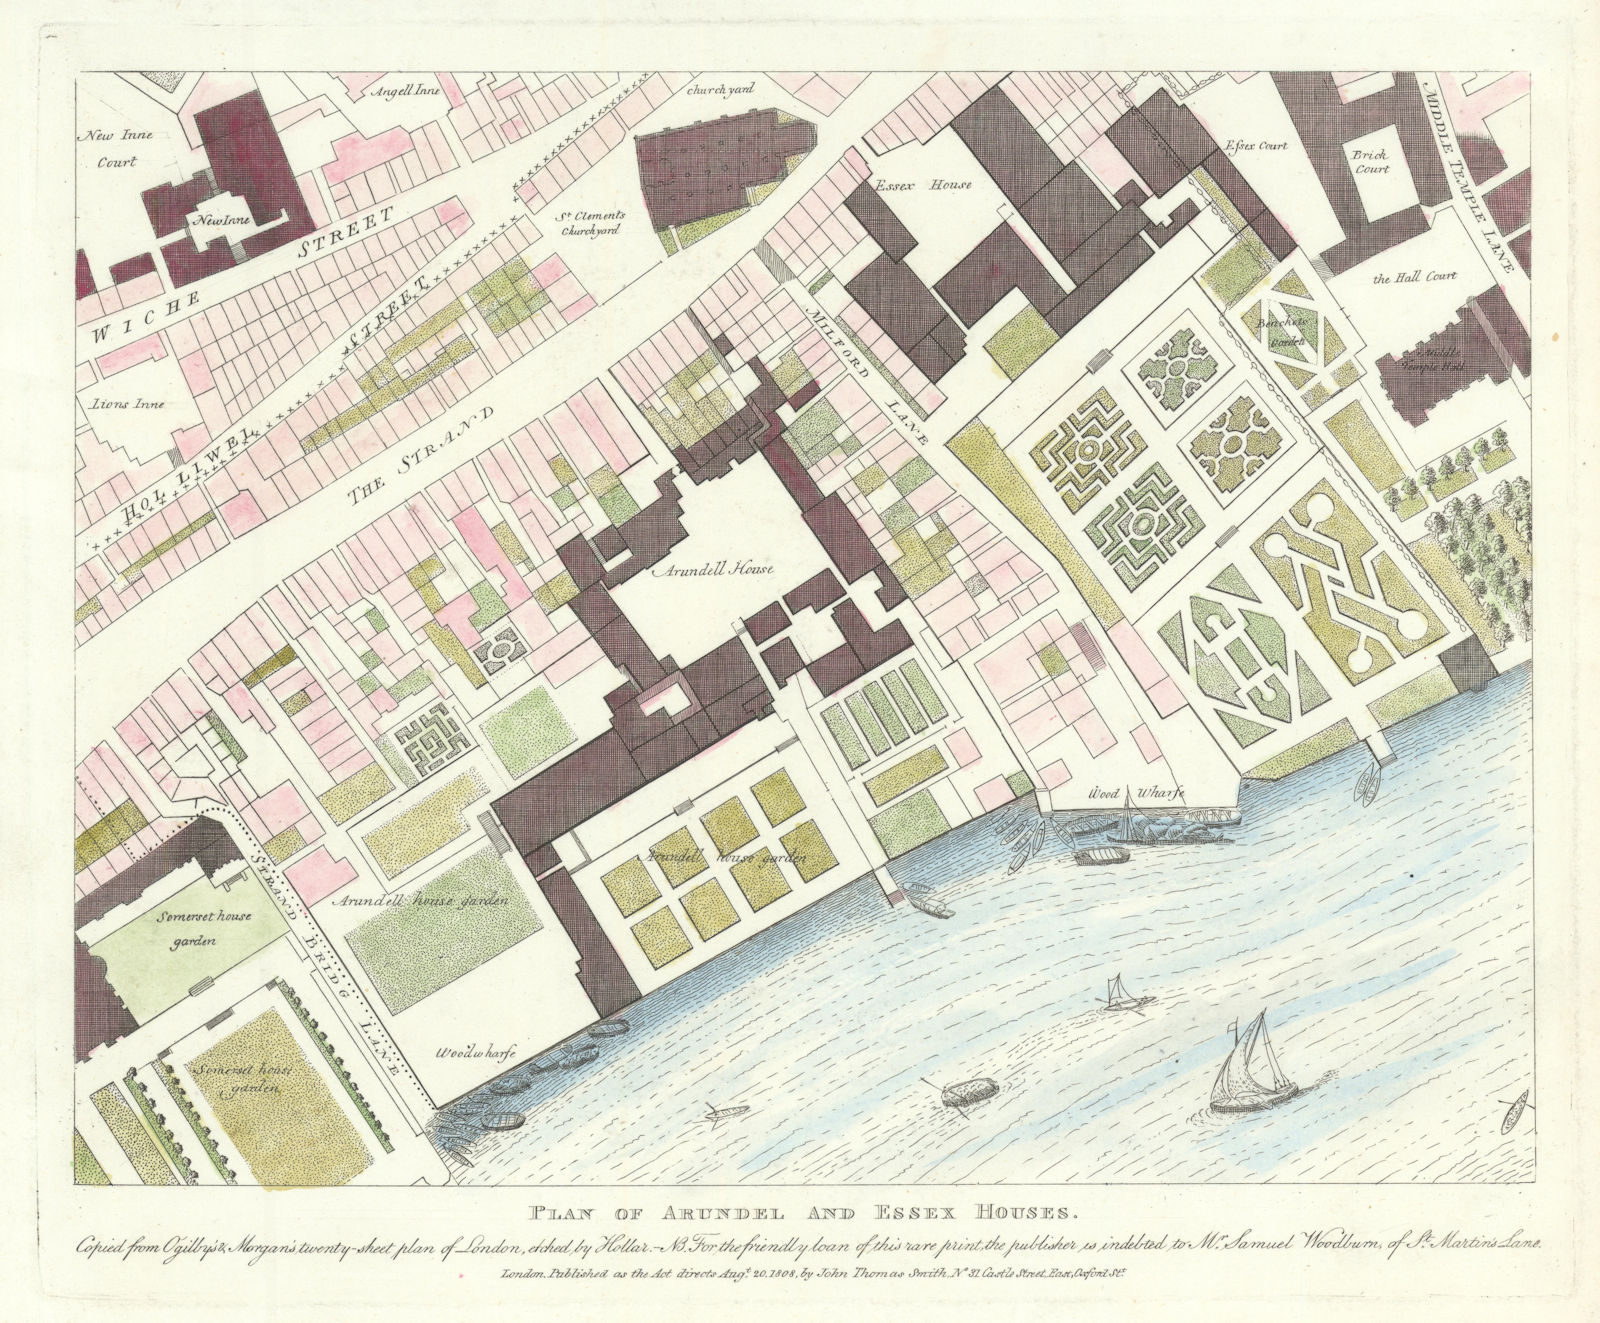 Strand. Arundel, Essex & Somerset Houses from Ogilby & Morgan. JT SMITH 1809 map